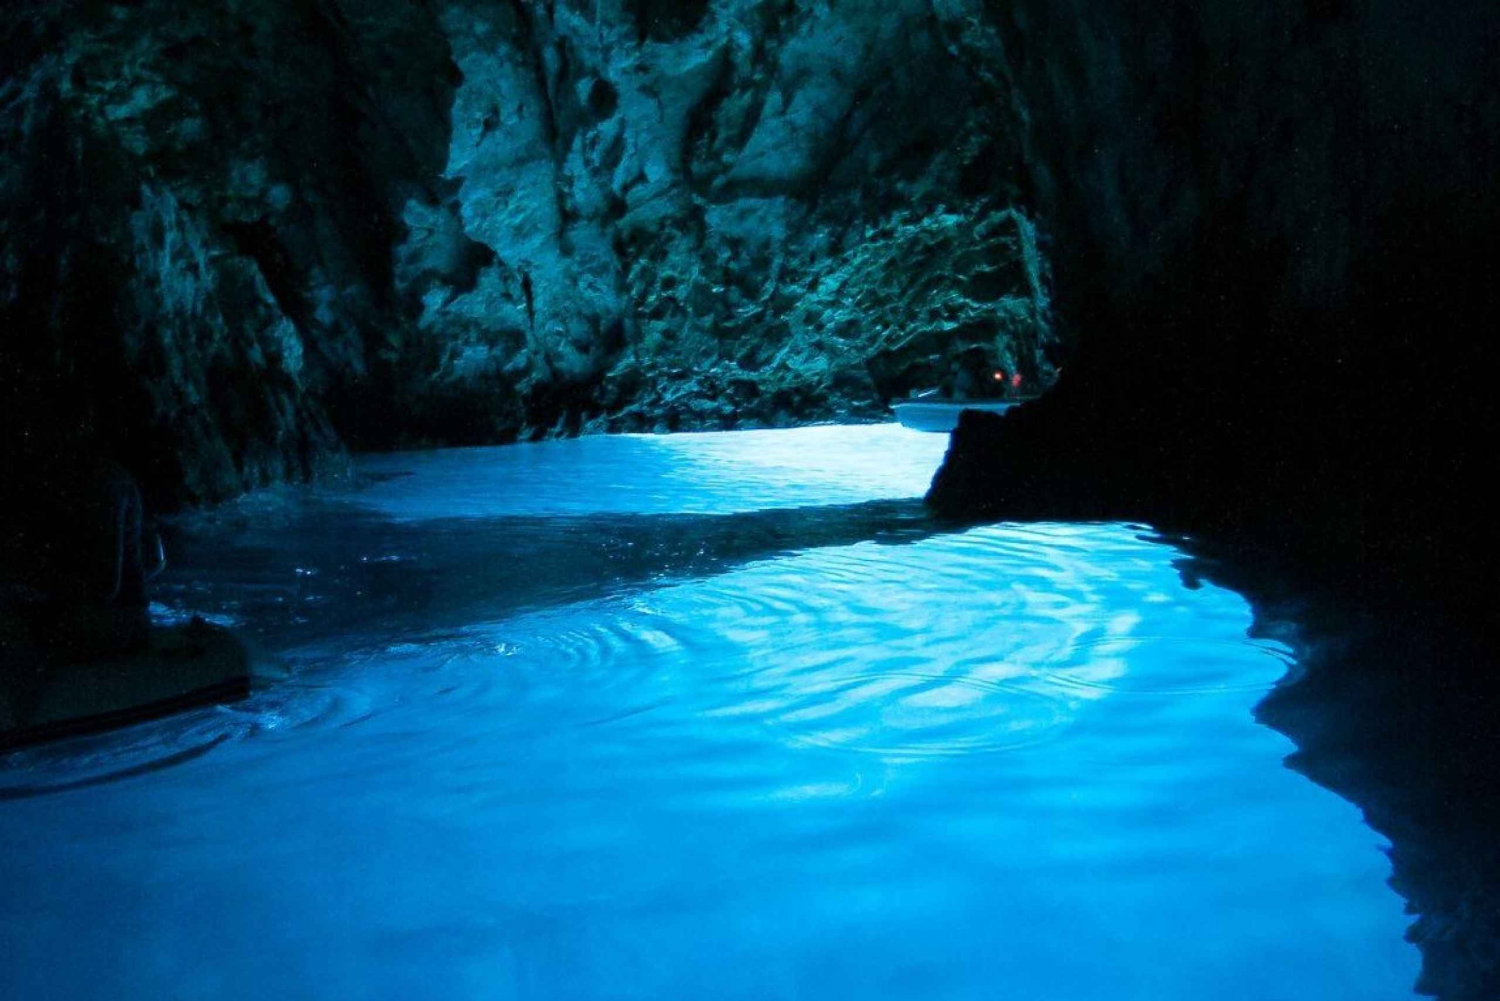 3IN1 ALL INCLUSIVE - BLUE CAVE 6 ISLAND - TICKET - LUNCH